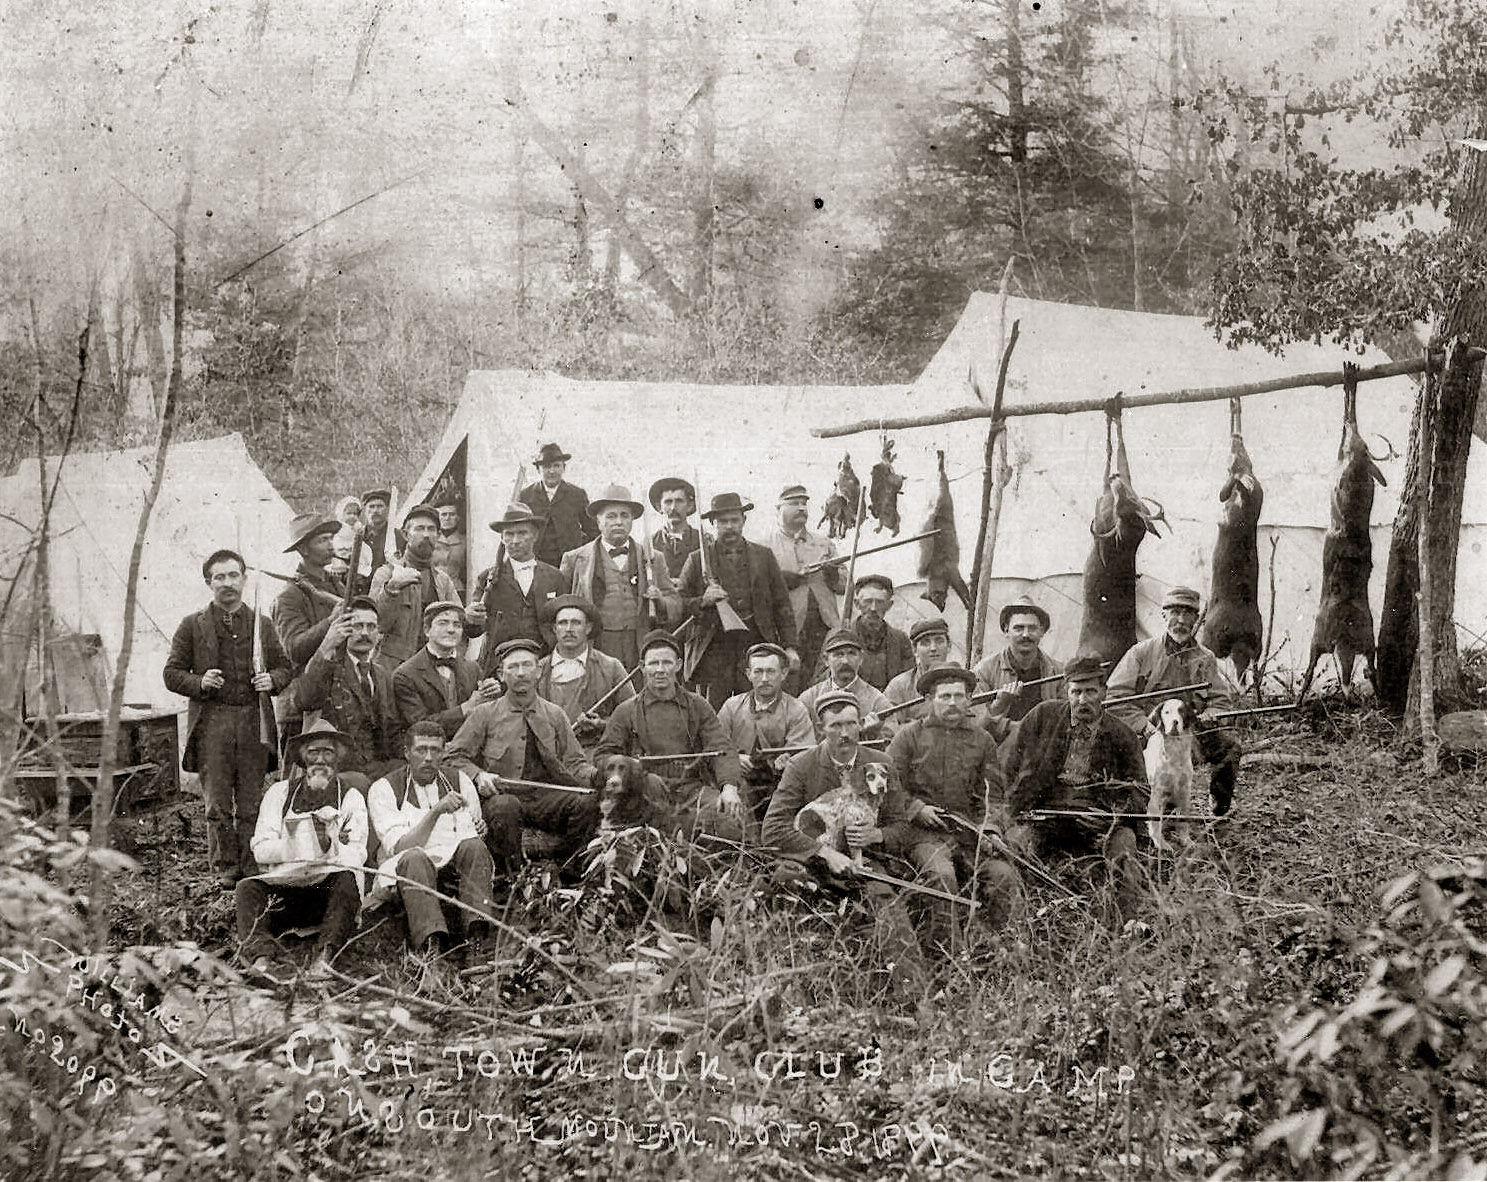 Cashtown Gun Club, Adams County, Pa., 1899. If you look closely at the old gent in the lower left, he's obviously the camp cook. He's holding a pot with a towel which is probably hot coffee. The man to his left must be his helper and he's holding something that appears to be a flask. A good time was had by all. 

The caption at the bottom reads: "Cashtown Gun Club in Camp on South Mountain Nov. 28, 1899" South Mountain is actually in Maryland, but not far away.

Cashtown is near Gettysburg and both Union and Confederate troop road through town and stayed at the Inn there which is still open to the public. I've tried to identify the men in the photograph but have had no success. Input welcome.